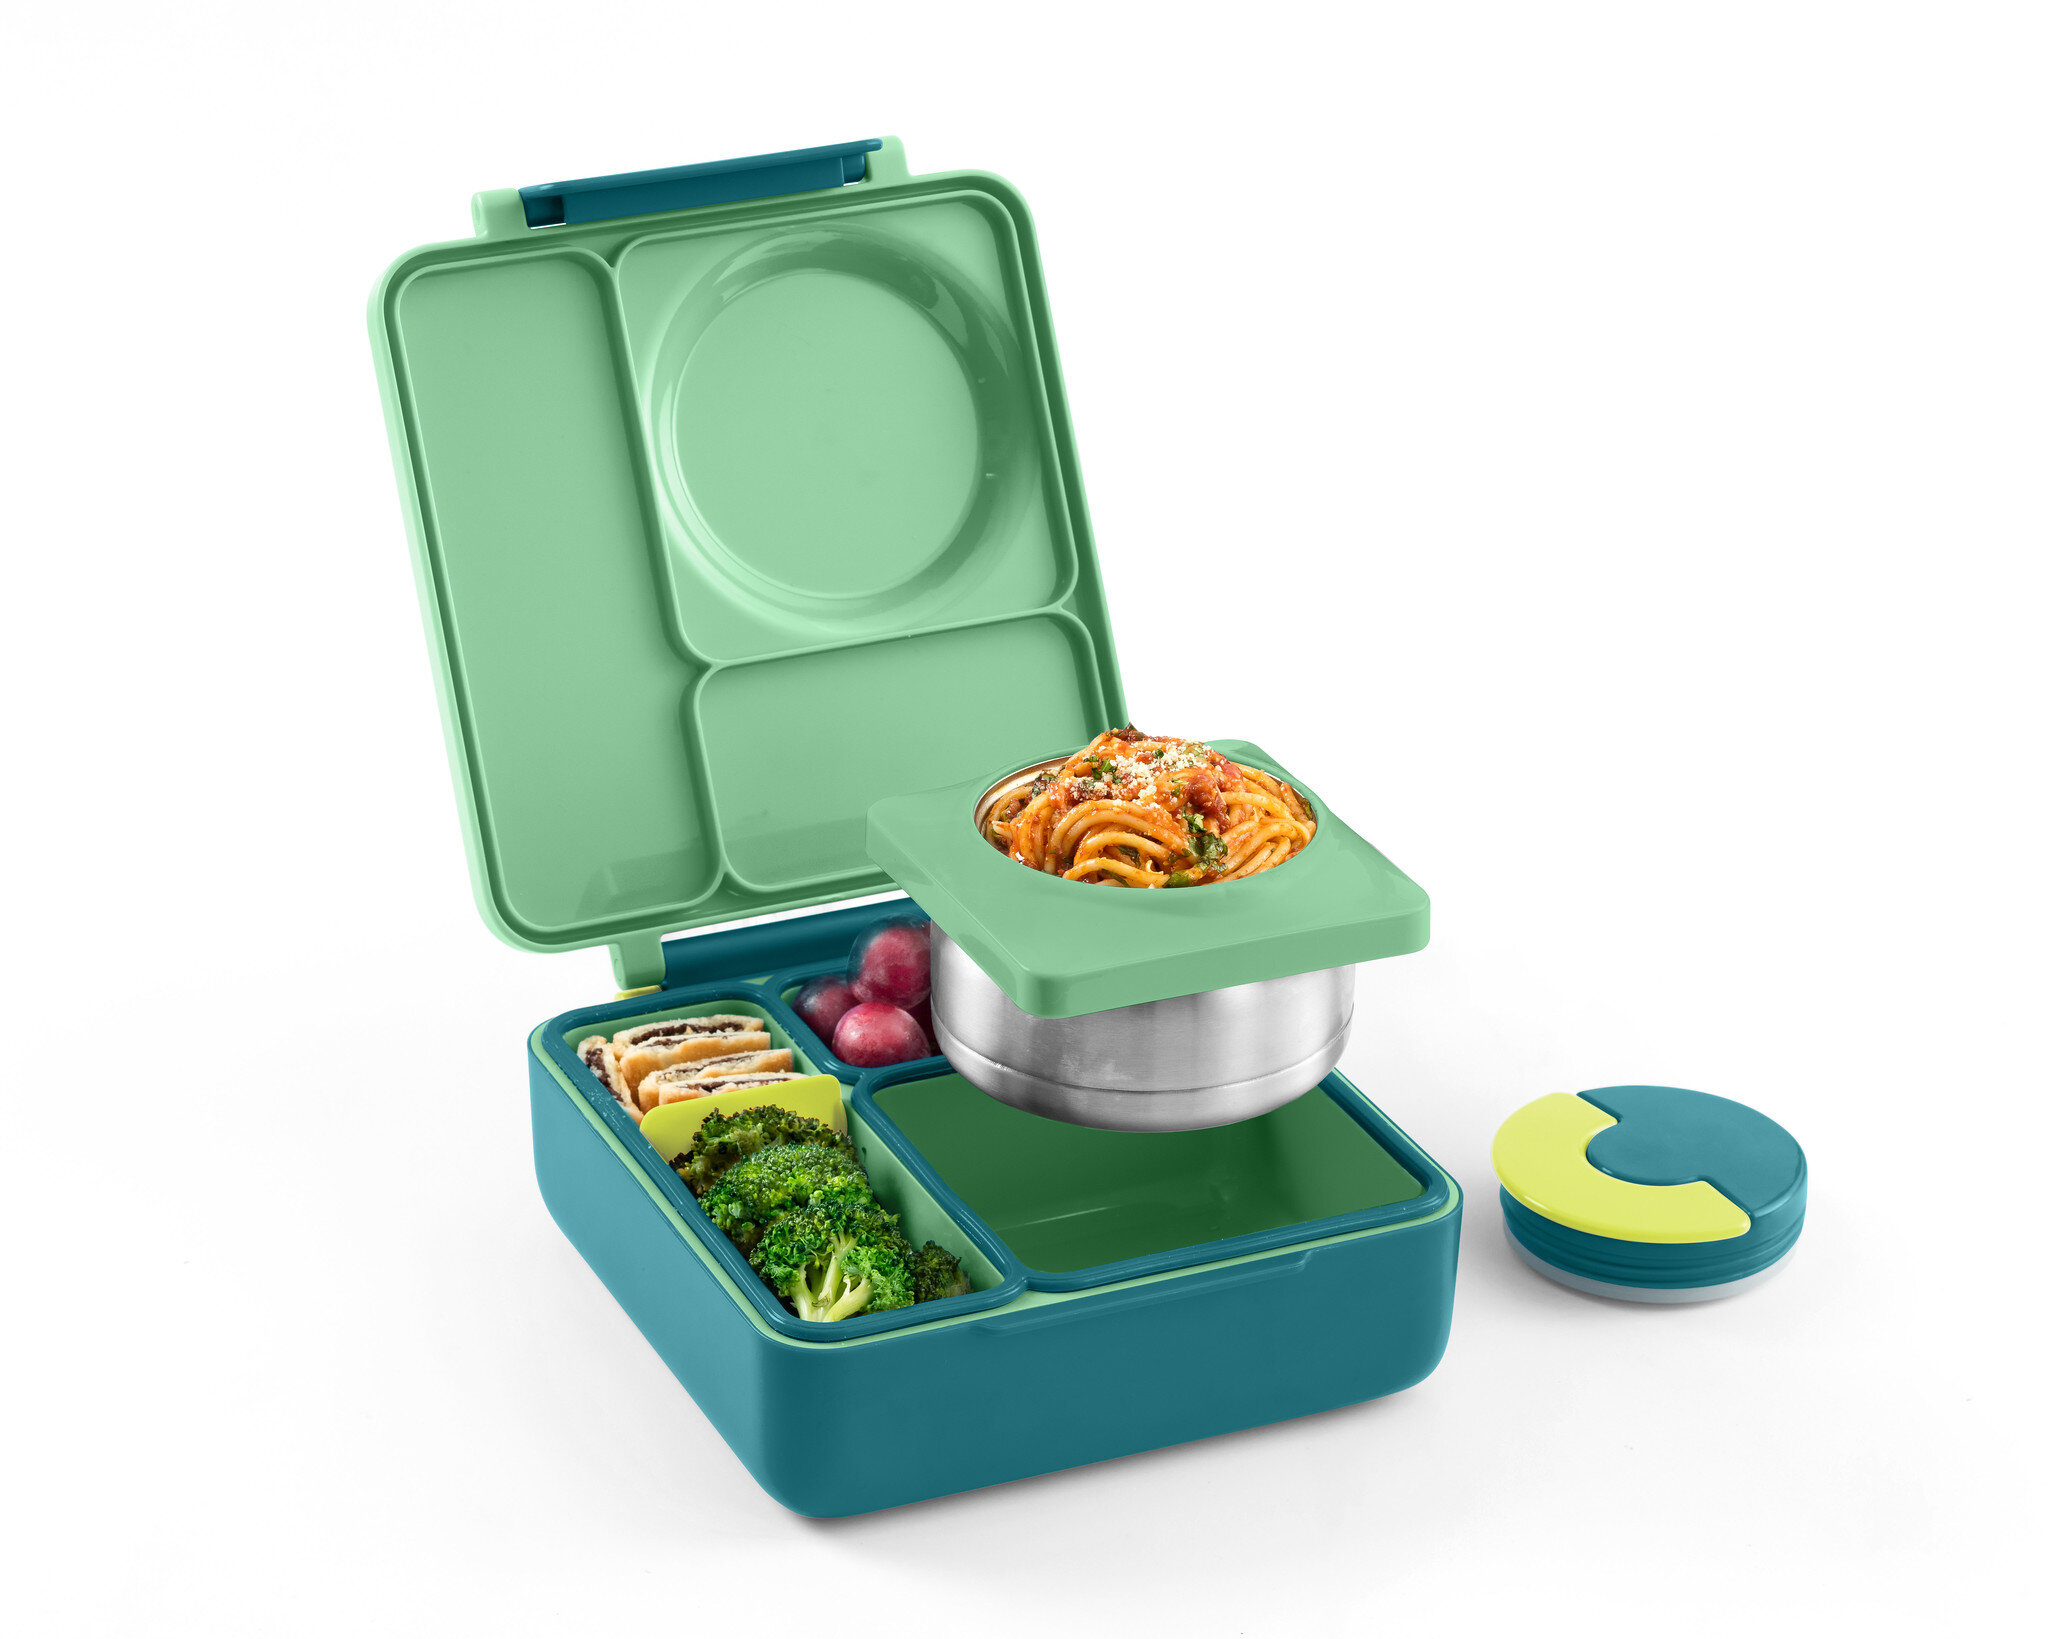 15 Best Bento Boxes for Kids in 2022 - Insulated Kids Bento Lunch